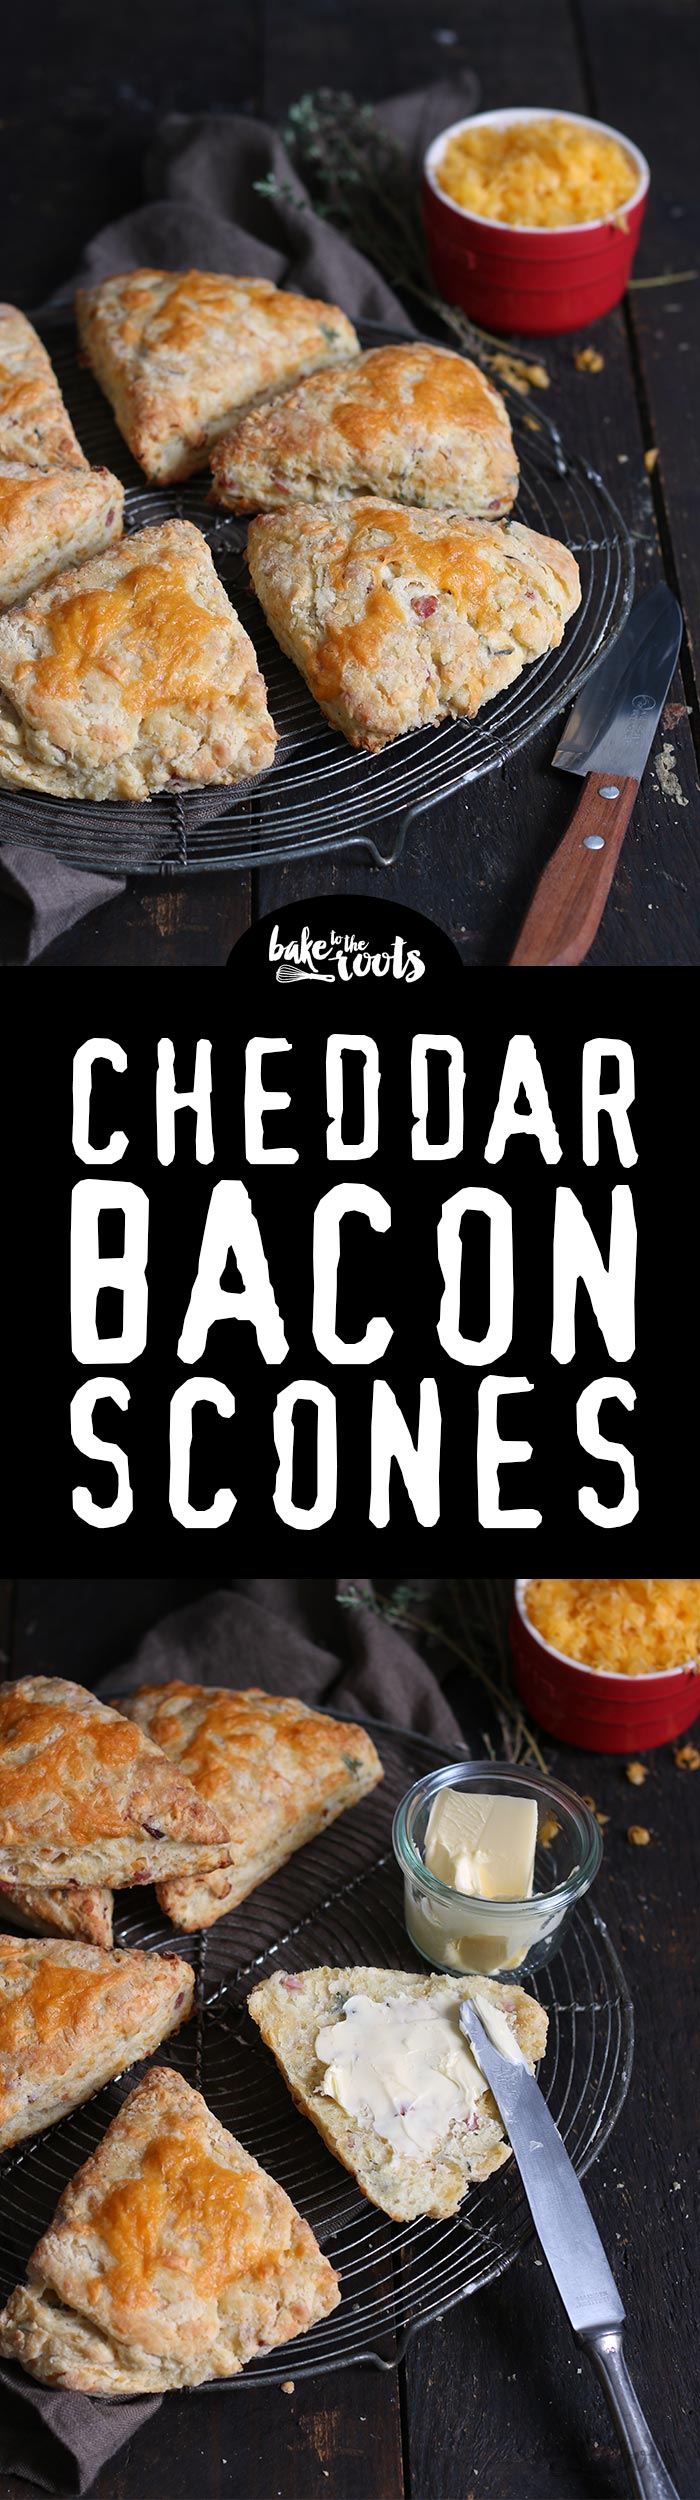 Delicious Scones with Cheddar Cheese, Bacon and Fresh Thyme | Bake to the roots